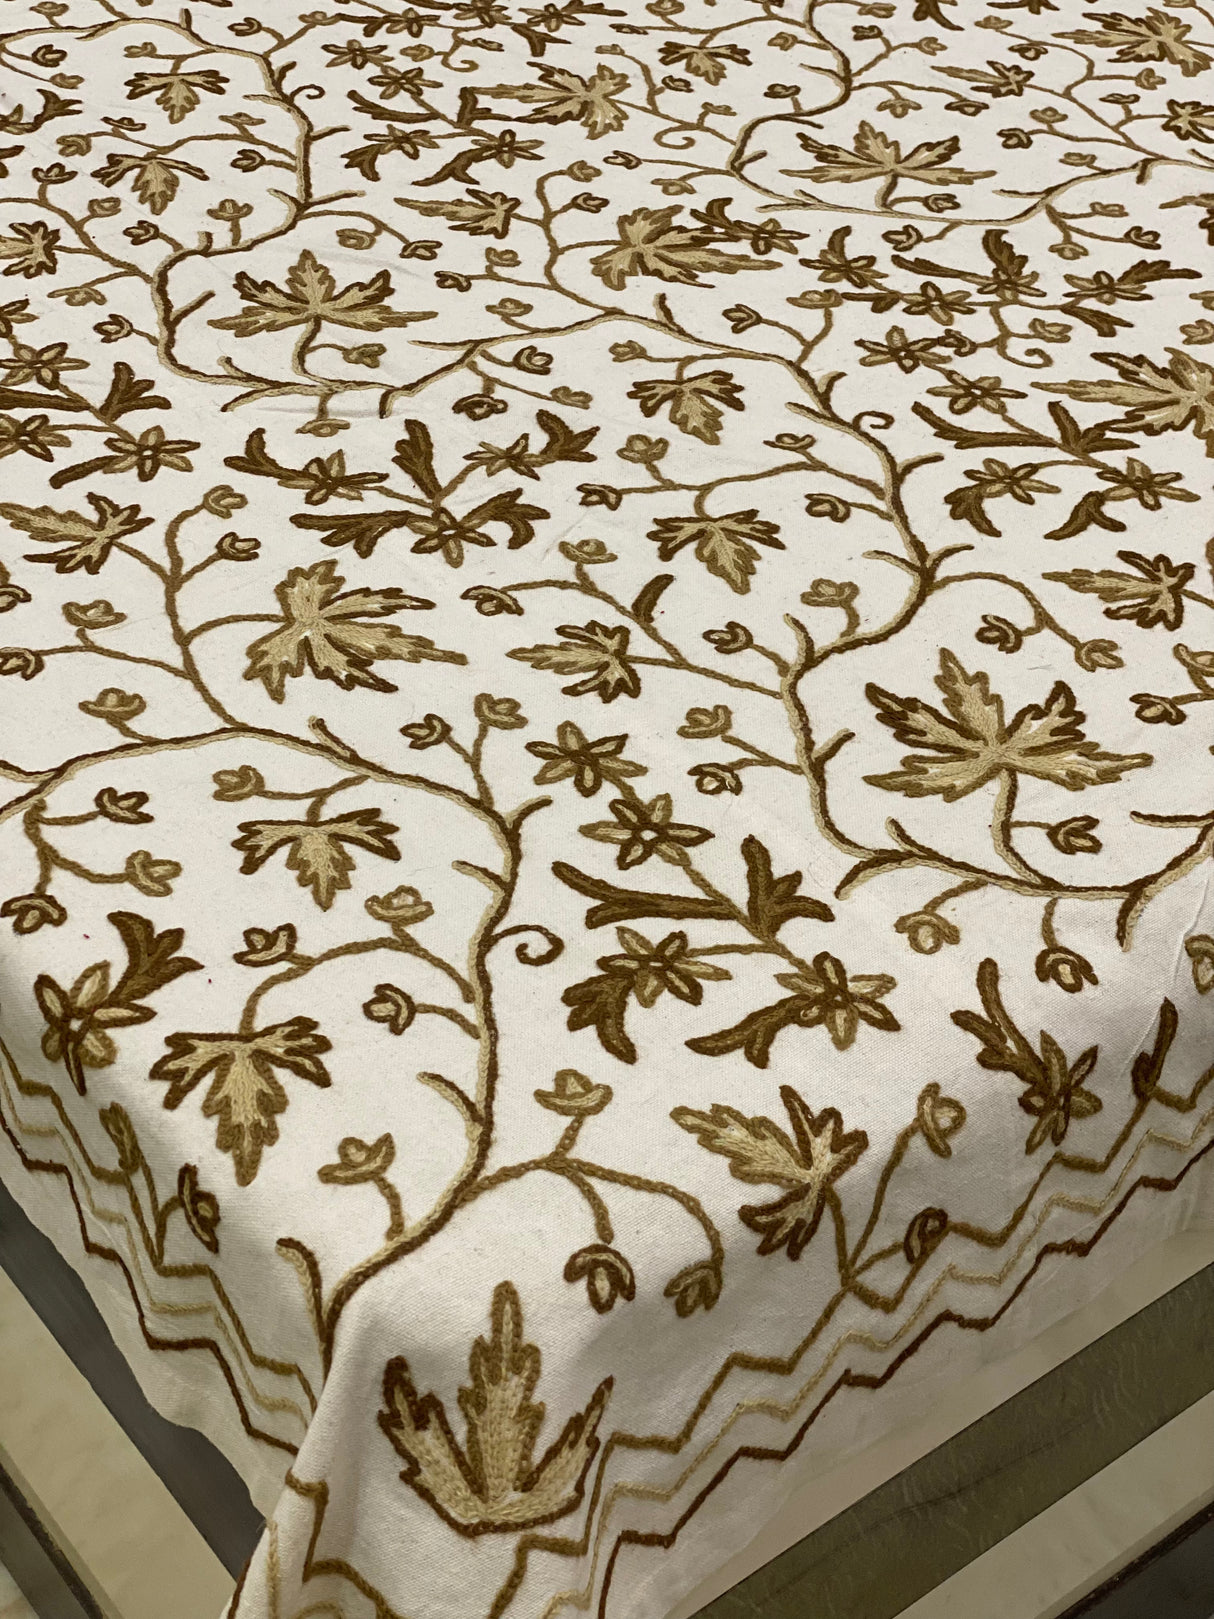 Kashmiri Embroidery Cotton Bedcover